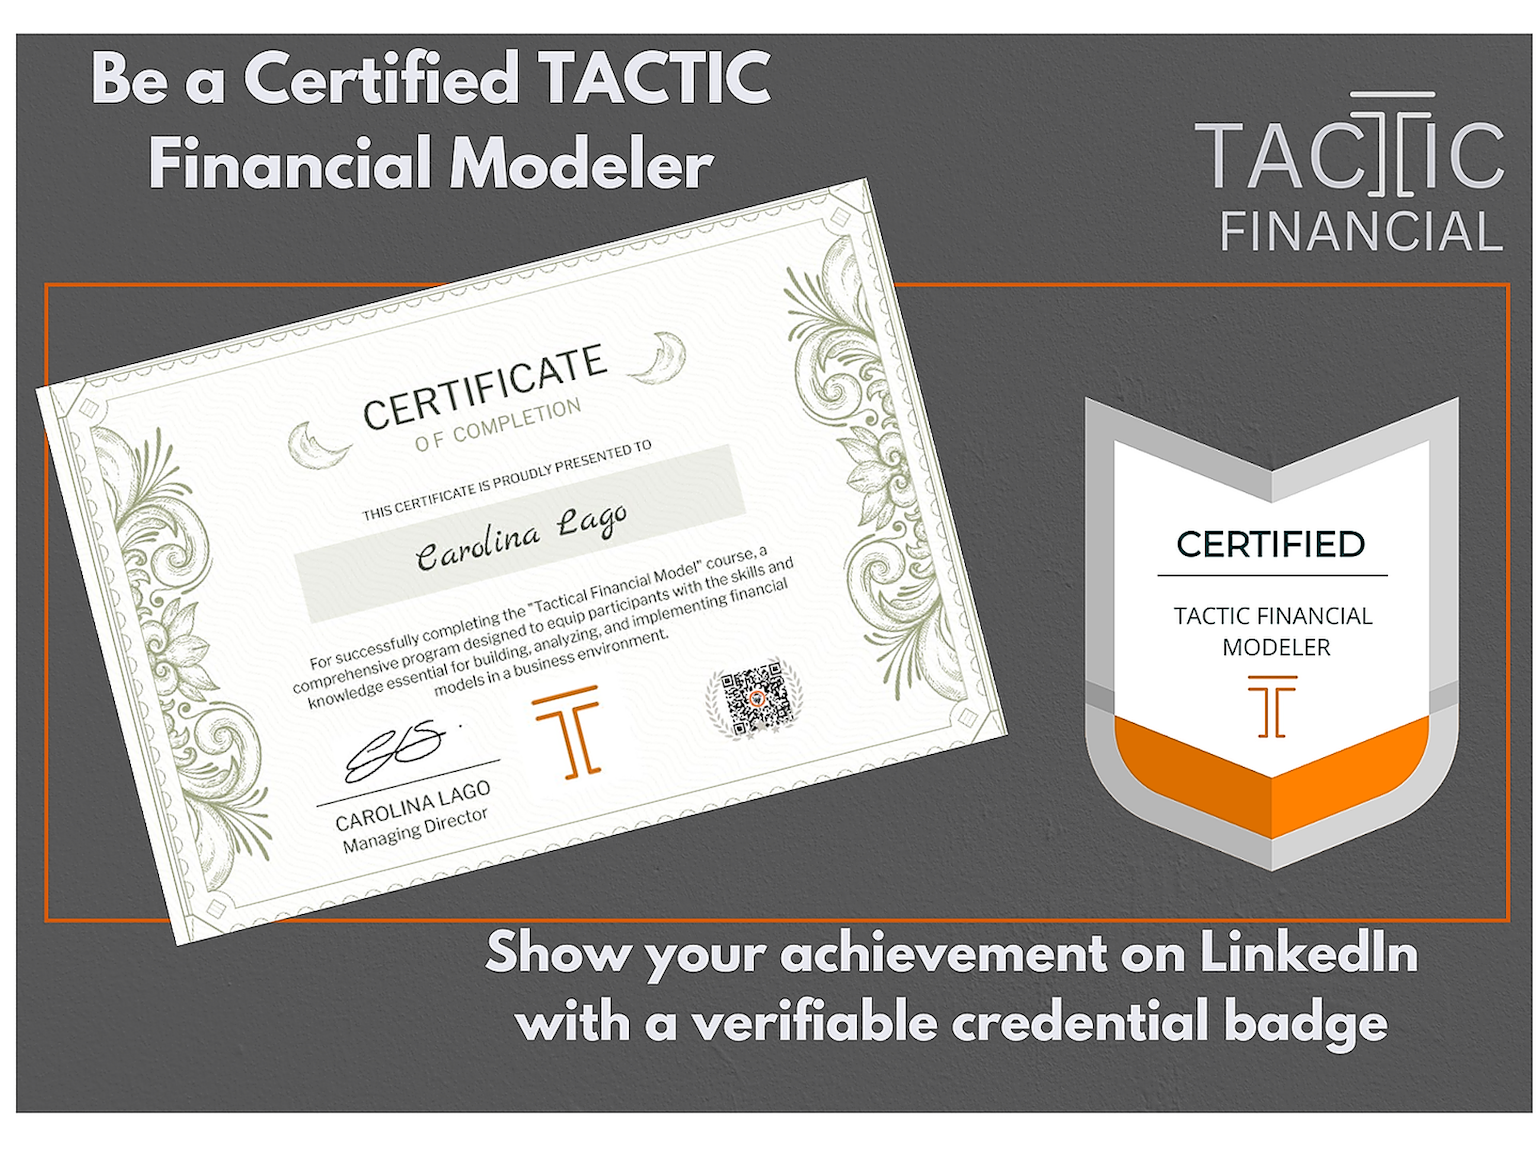 Become a Certified TACTIC Financial Modeler